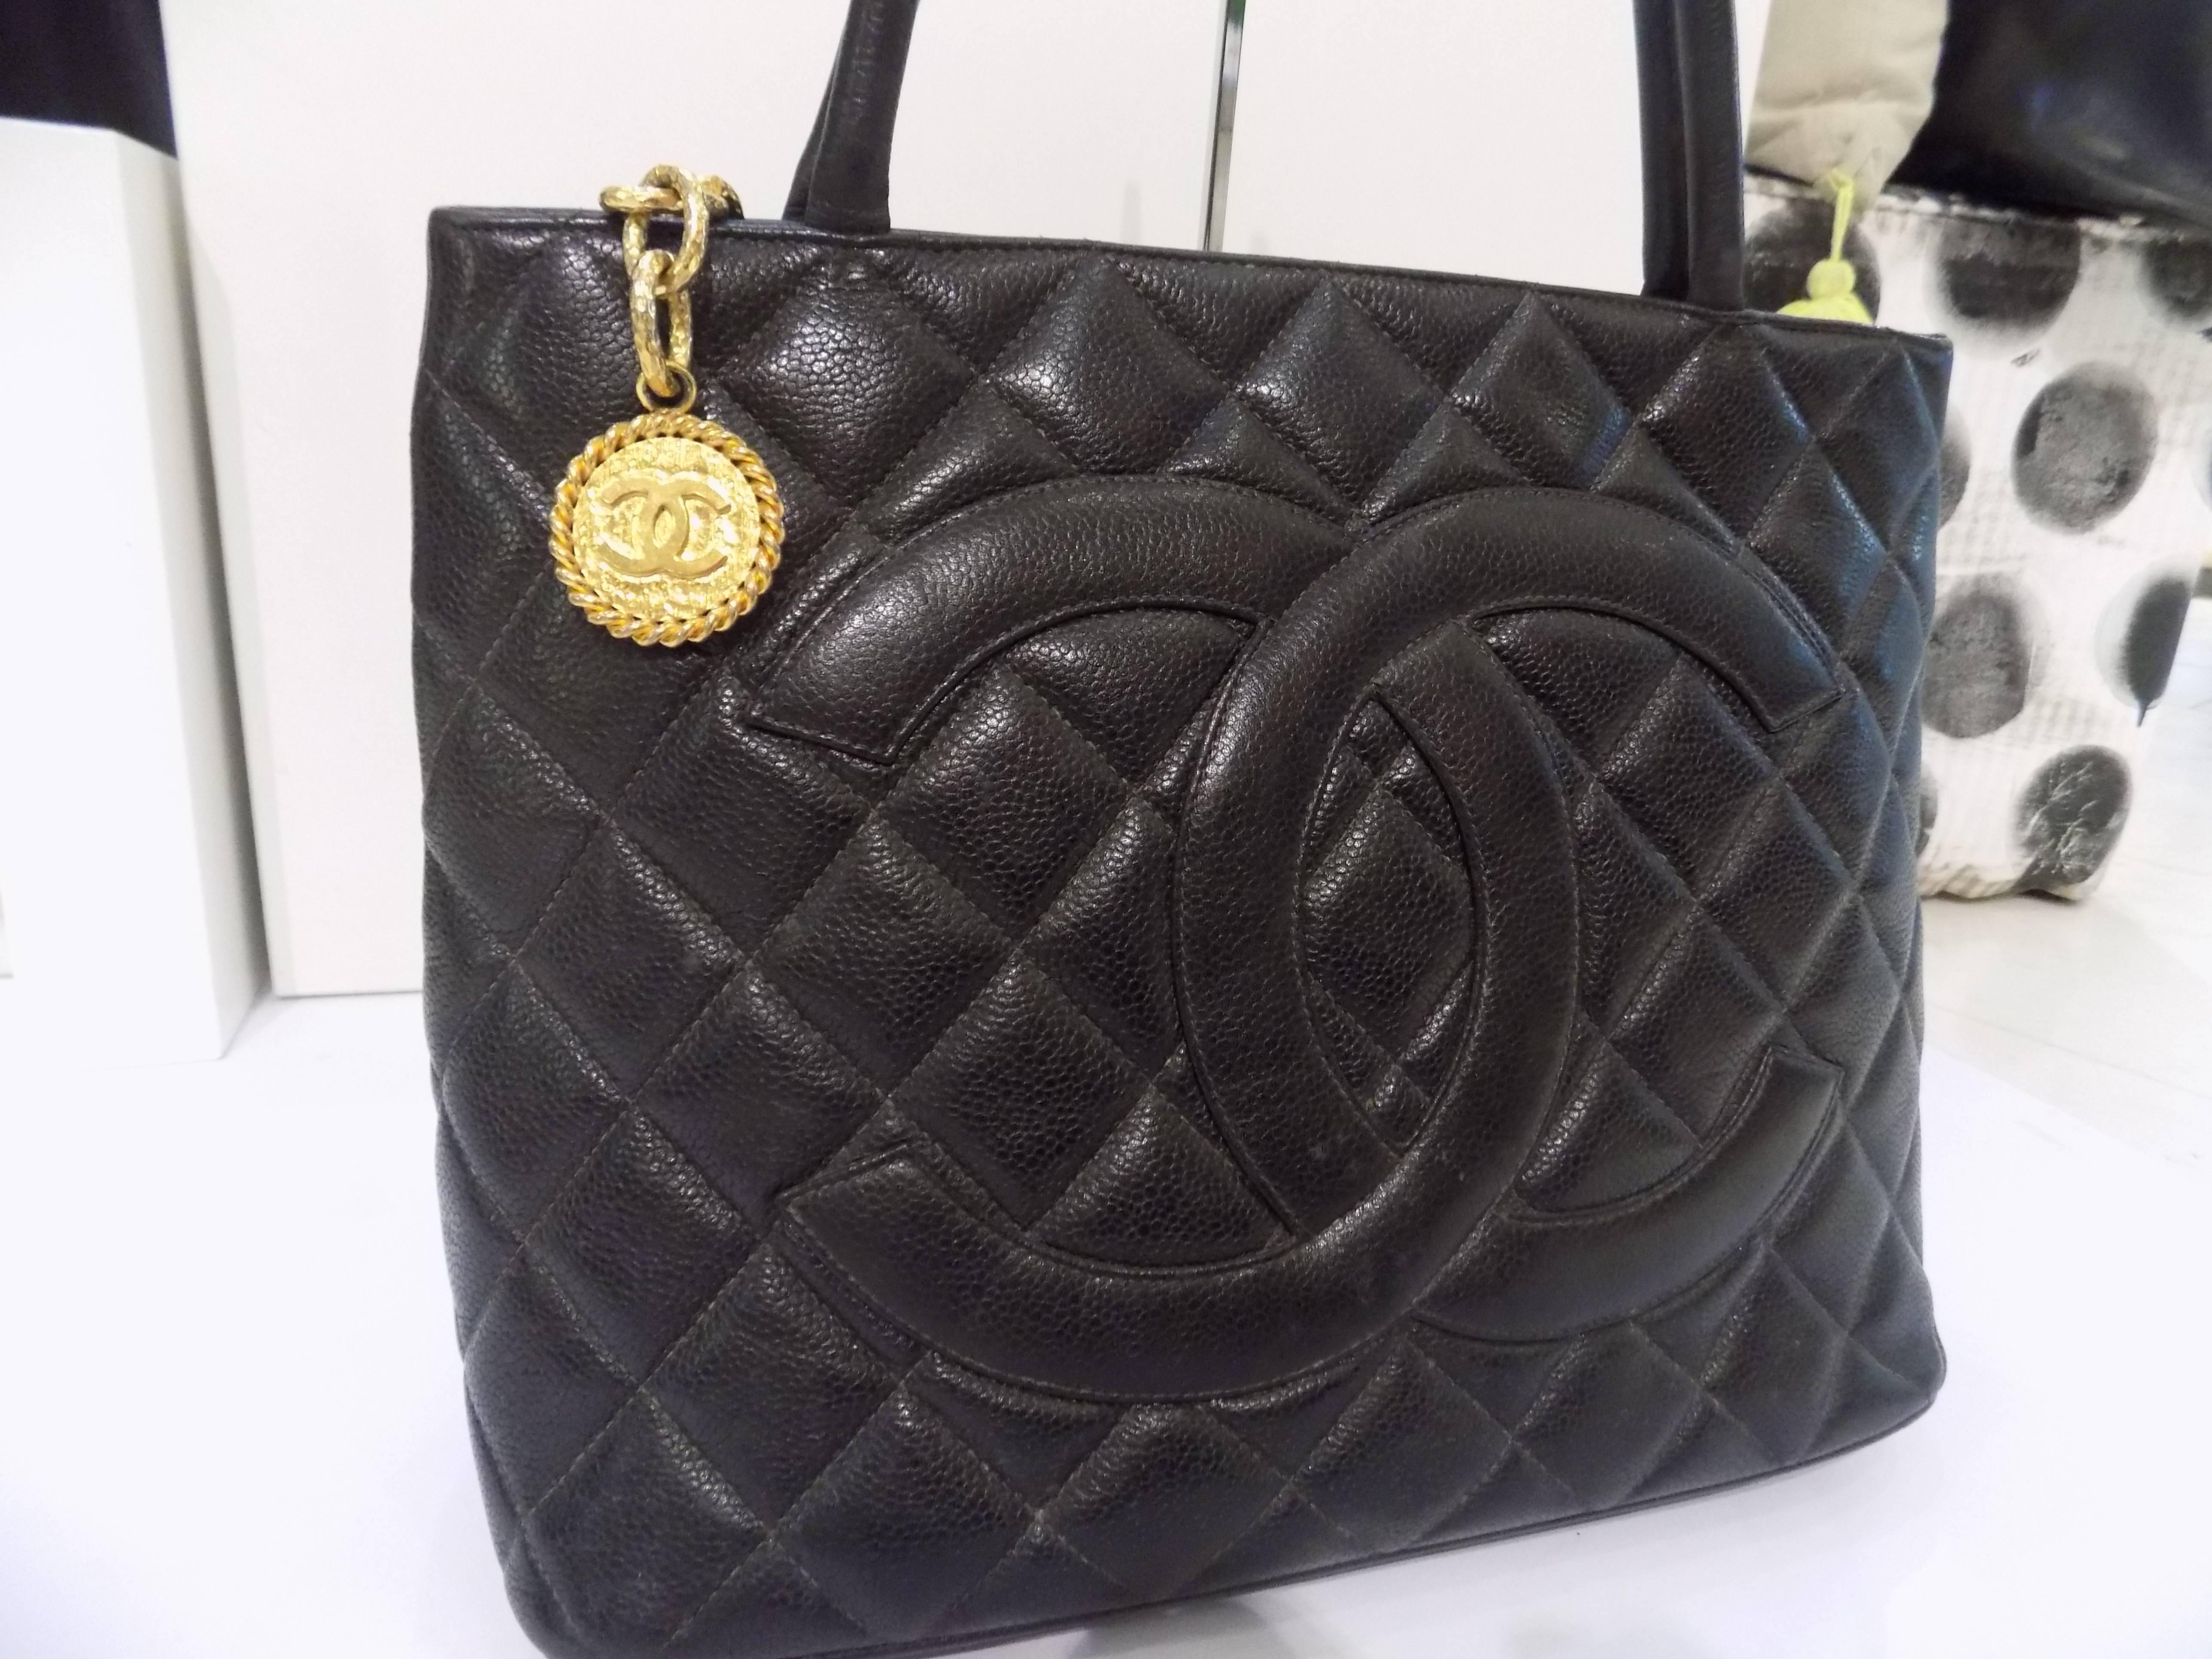 CHANEL Black Quilted Caviar Leather CC Medallion Tote Bag
Description:
Black caviar leather 'Medallion' tote from Chanel Vintage featuring round top handles, a top zip fastening, a back slip pocket, an internal zipped pocket, an internal slip